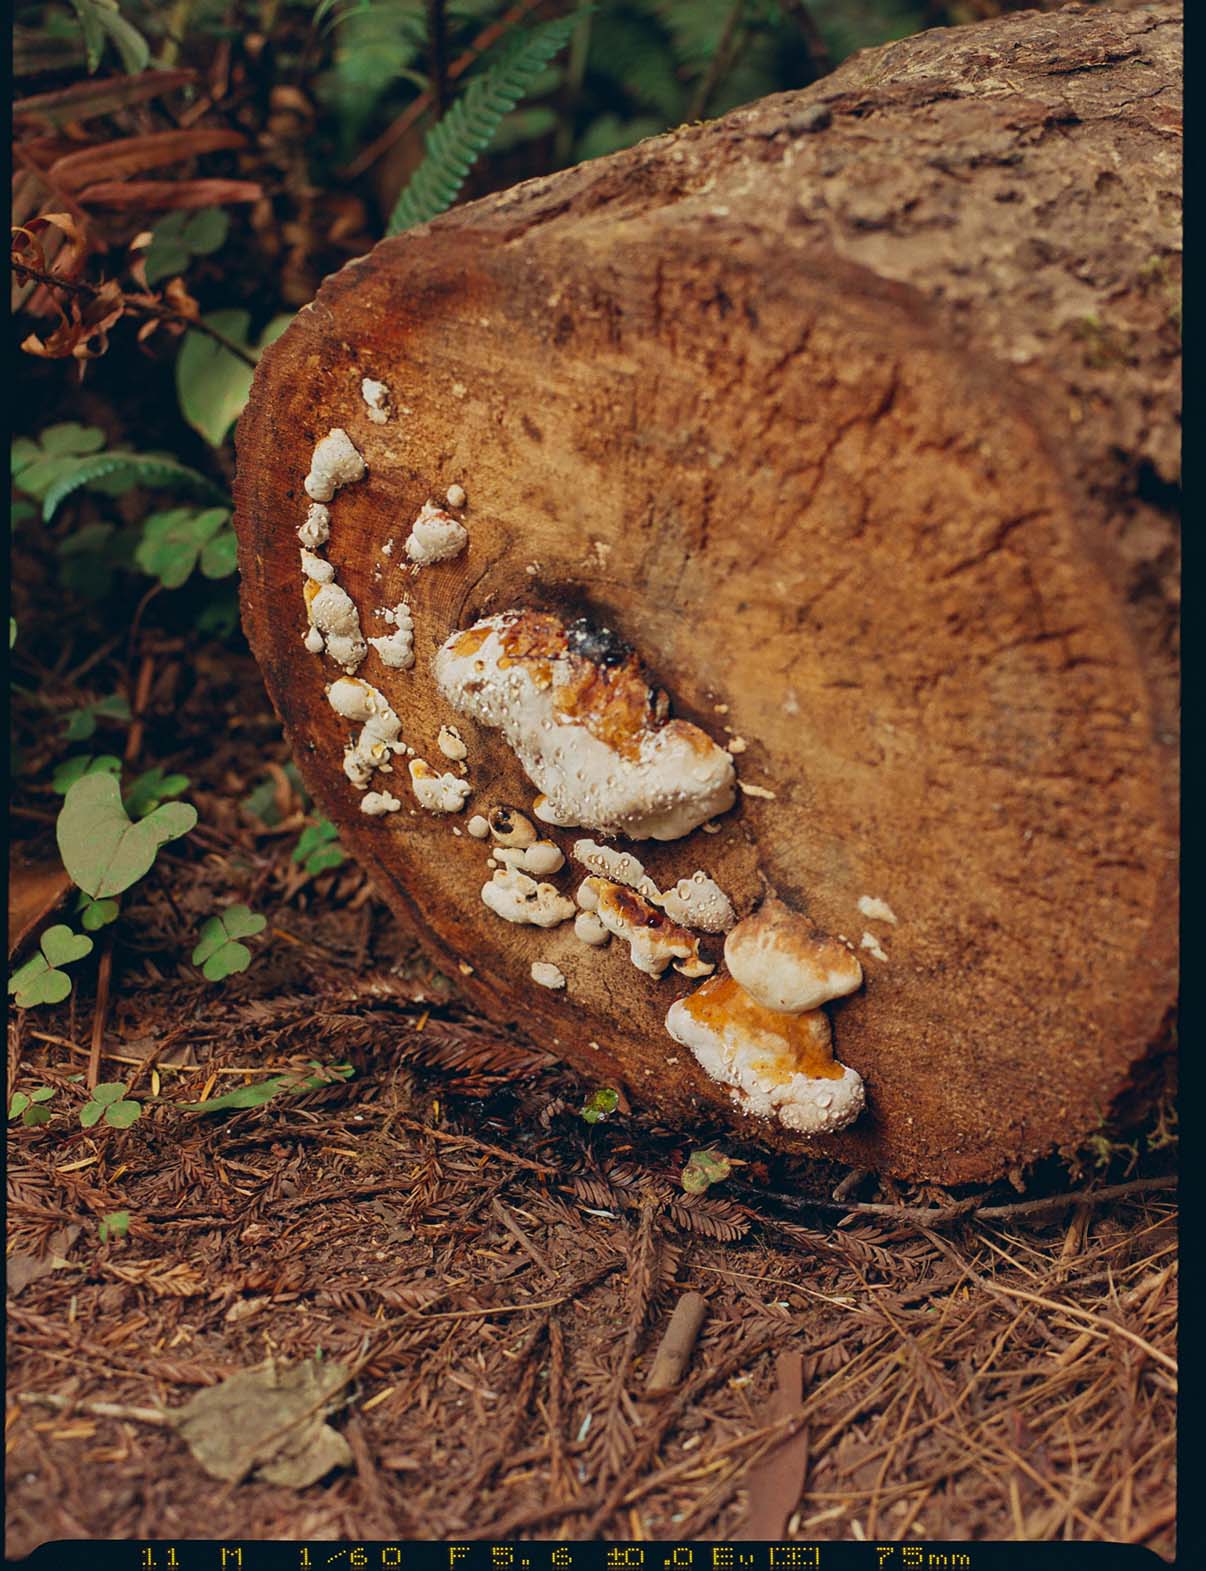 Fungus covered in sap growing on the side of a fallen redwood tree